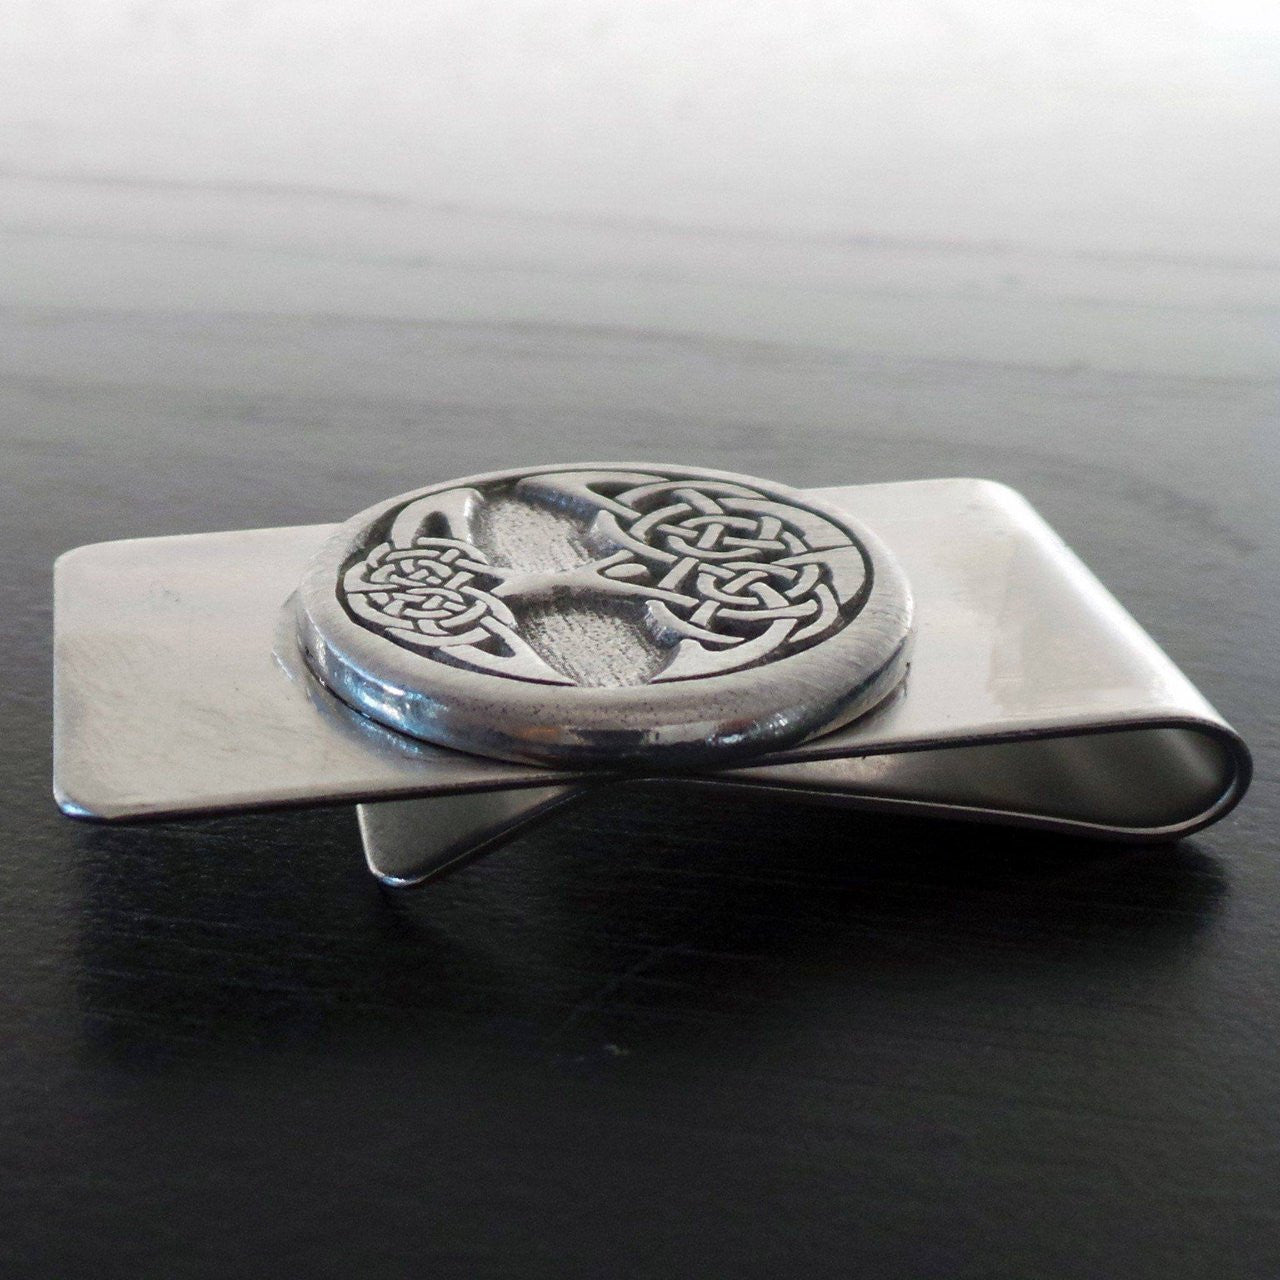 Money Clip With Tree Of Life Pewter Badge